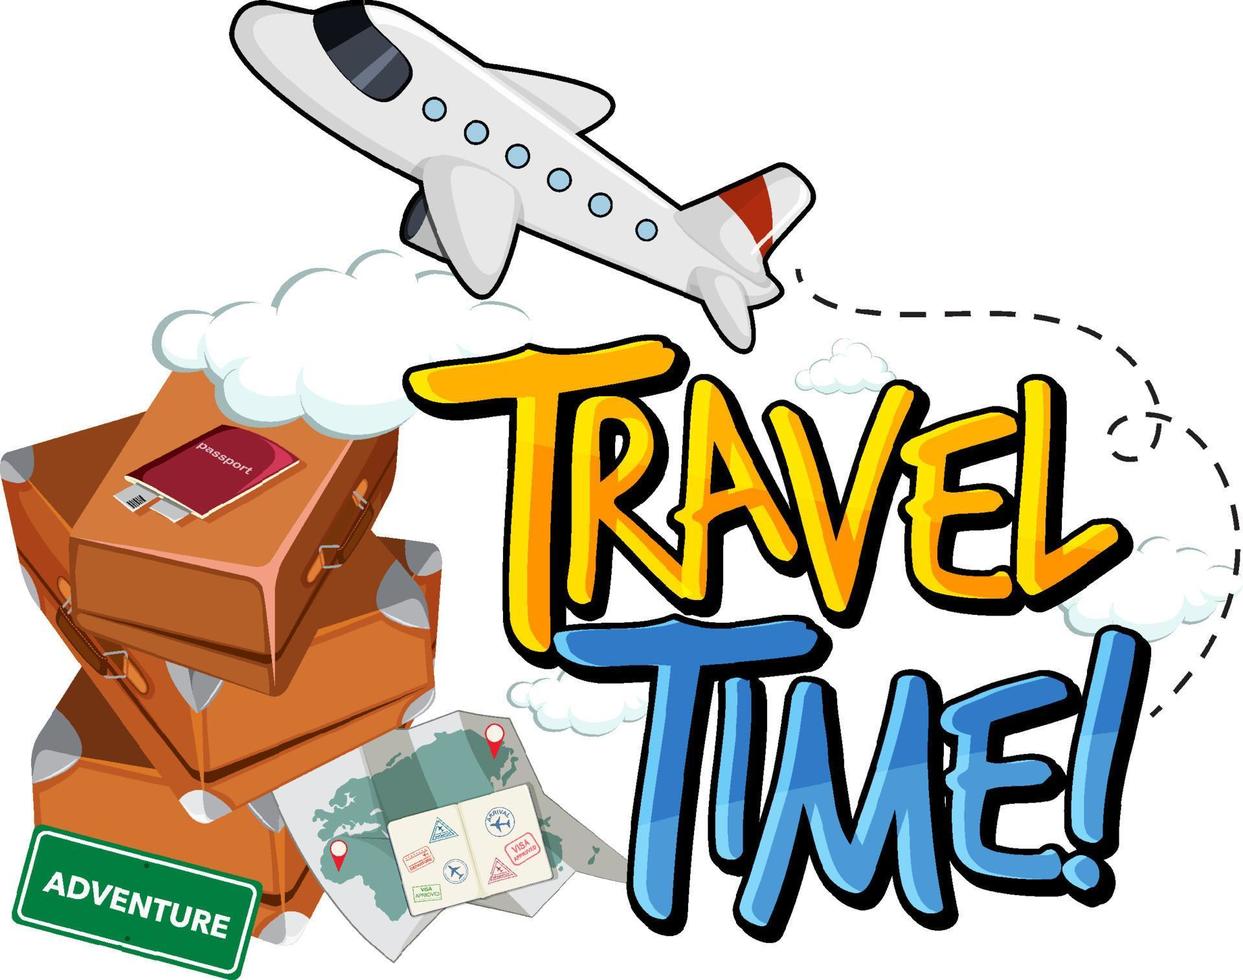 Travel Time typography design with luggages and airplane vector